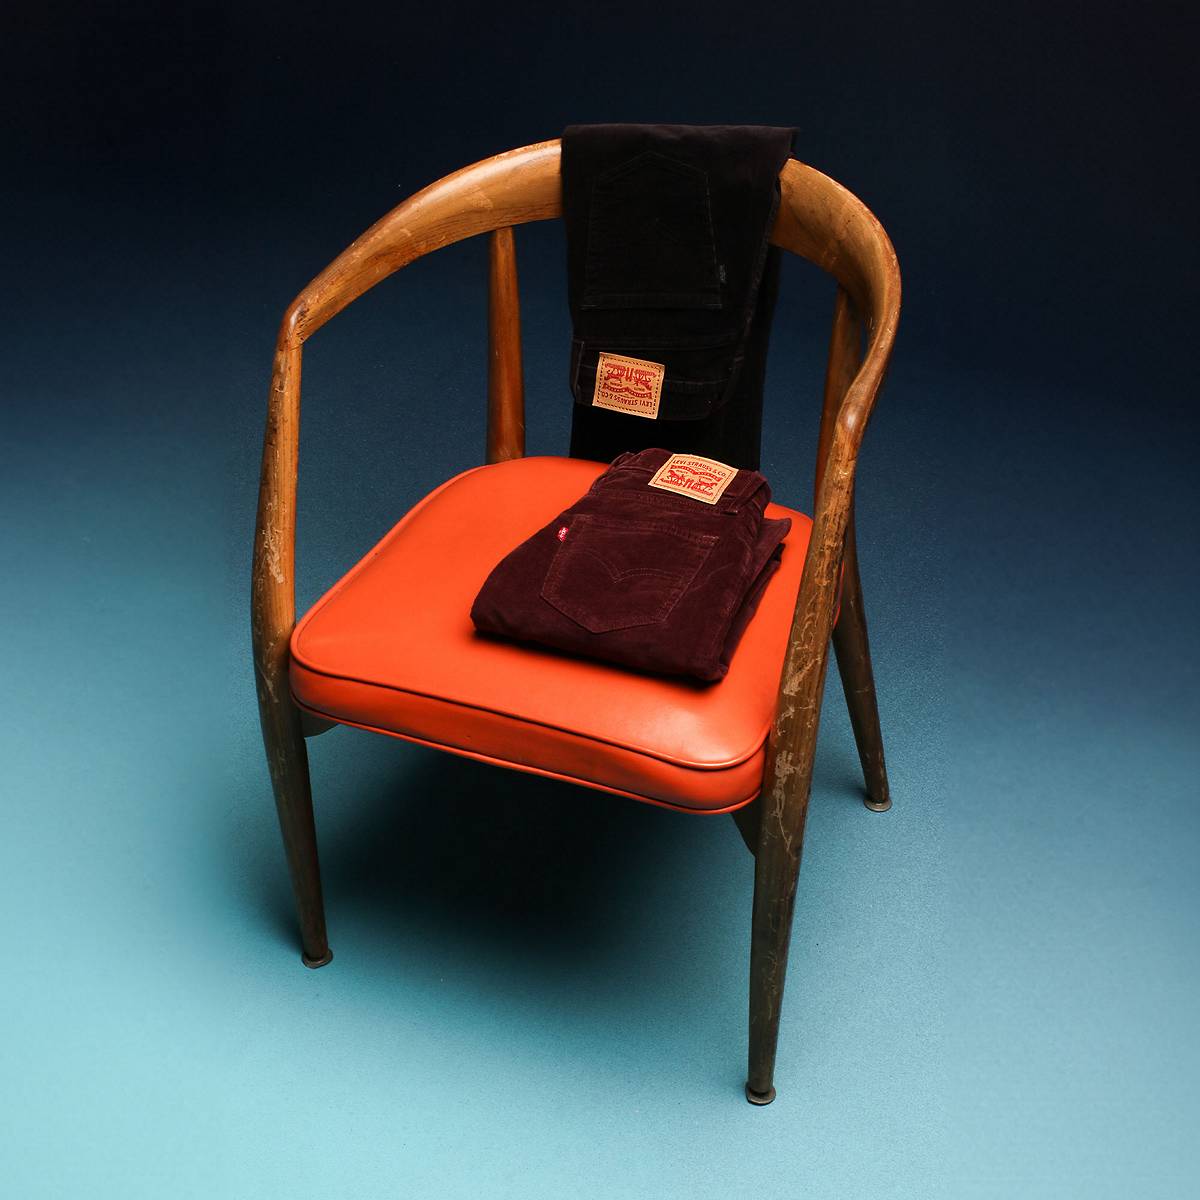 Corduroy pants draped over a chair against a blue gradient background